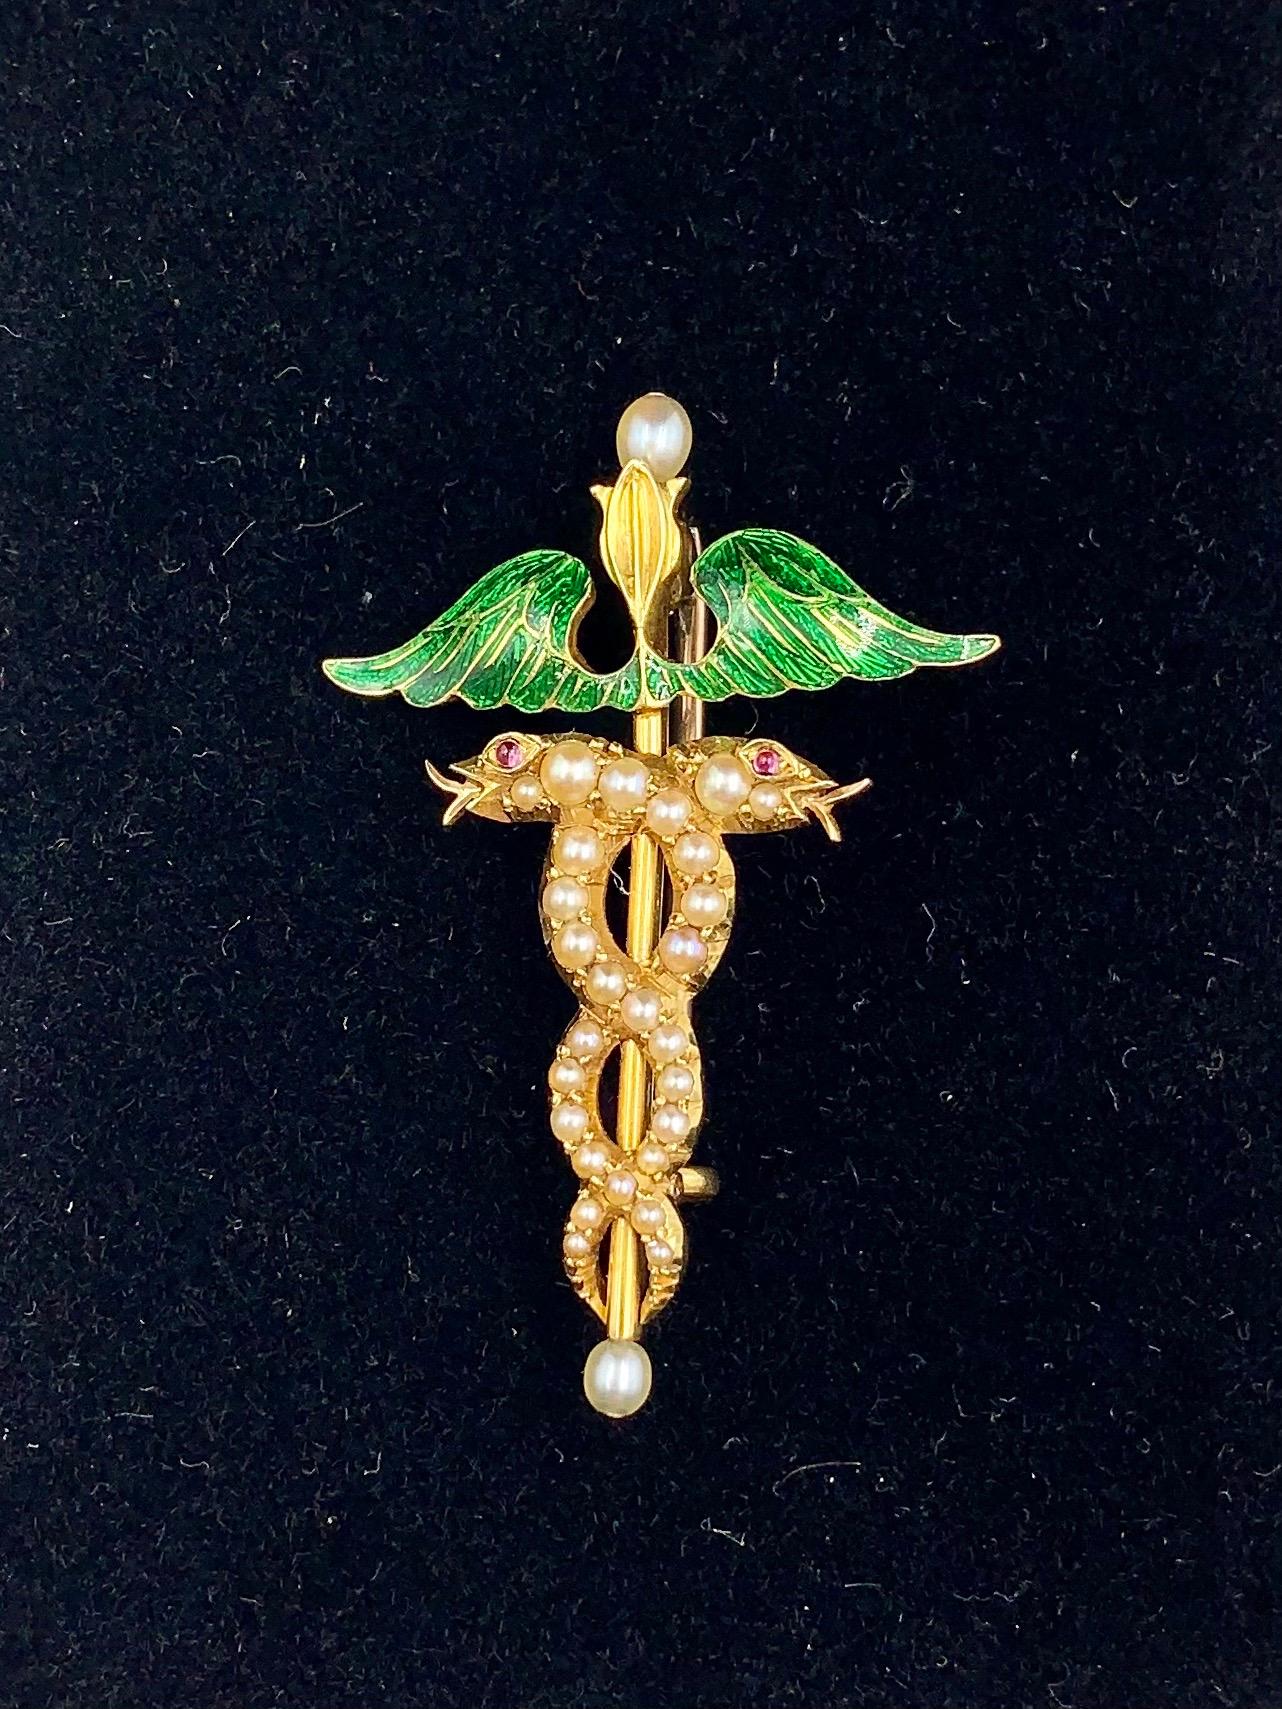  A fine antique Caduceus brooch in 18K yellow gold with a pair of seed pearl entwined serpents with cabochon ruby eyes surmounted by a pair of green guilloche enamel wings centered by a gold staff terminated by two pearls. Beautifully executed